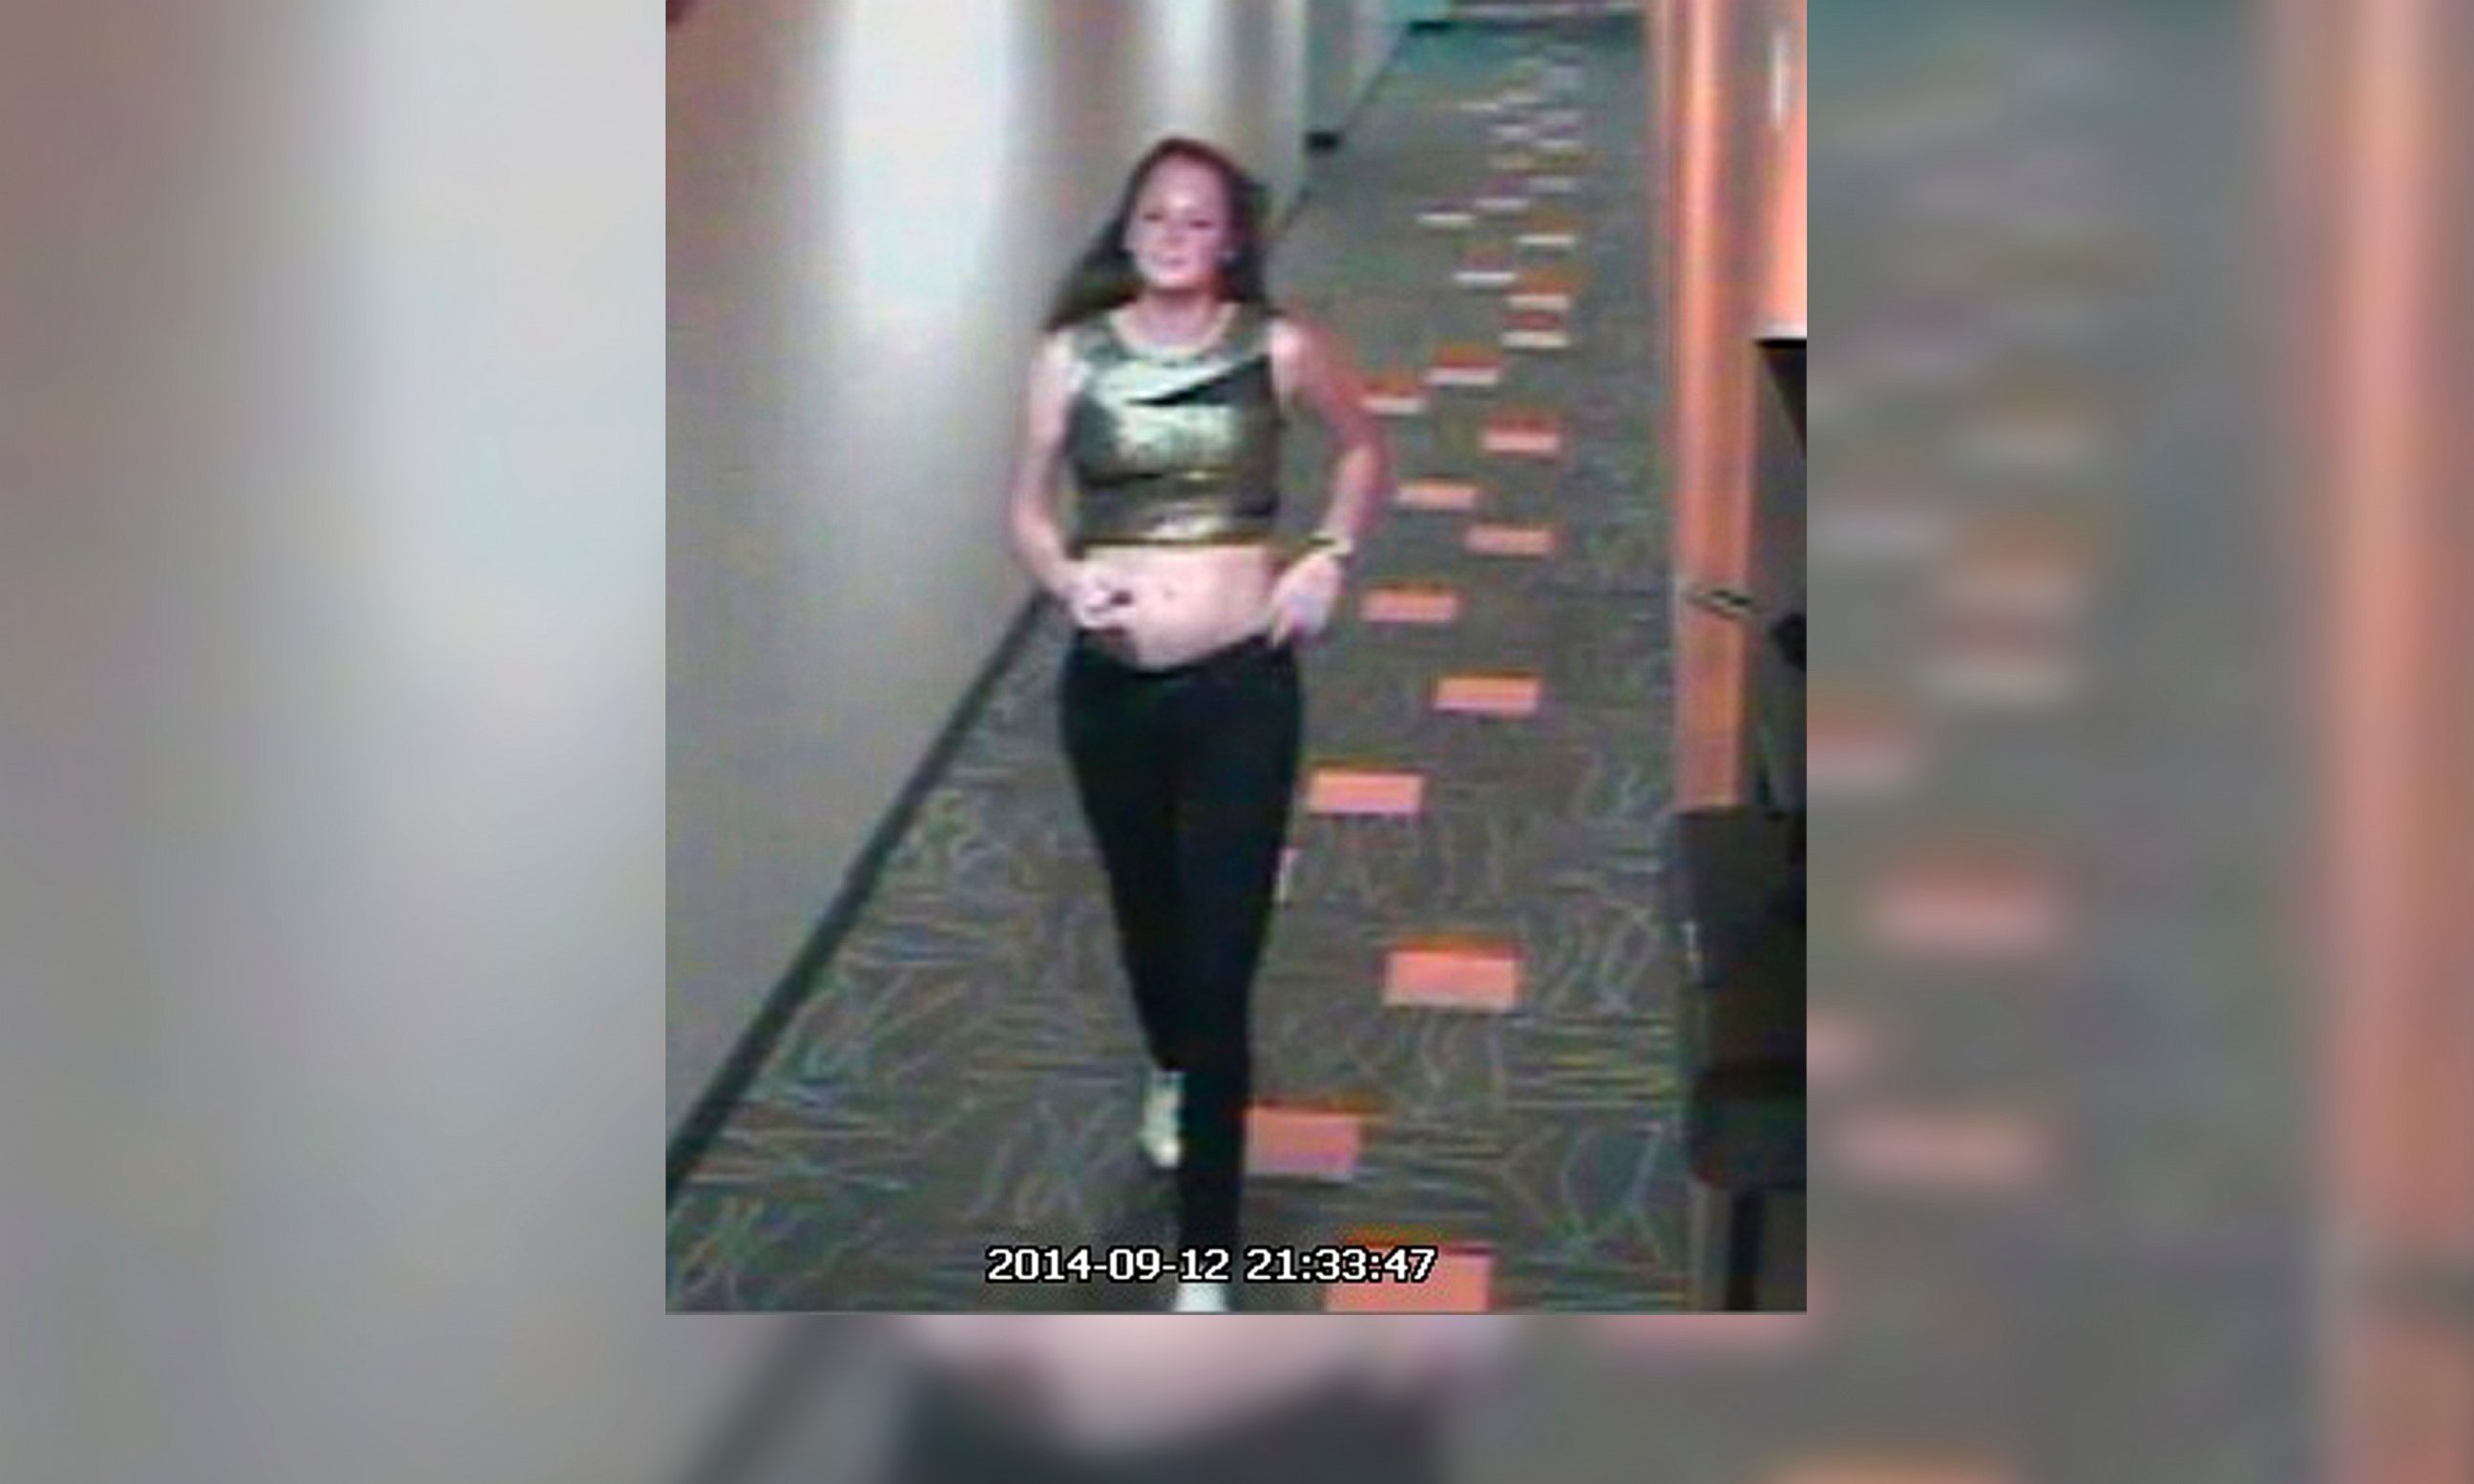 PHOTO: Missing 18-year-old University of Virginia student, Hannah Graham, is seen in a surveillance photo made on the evening of Friday, Sept. 12, 2014 in Charlottesville, Va.